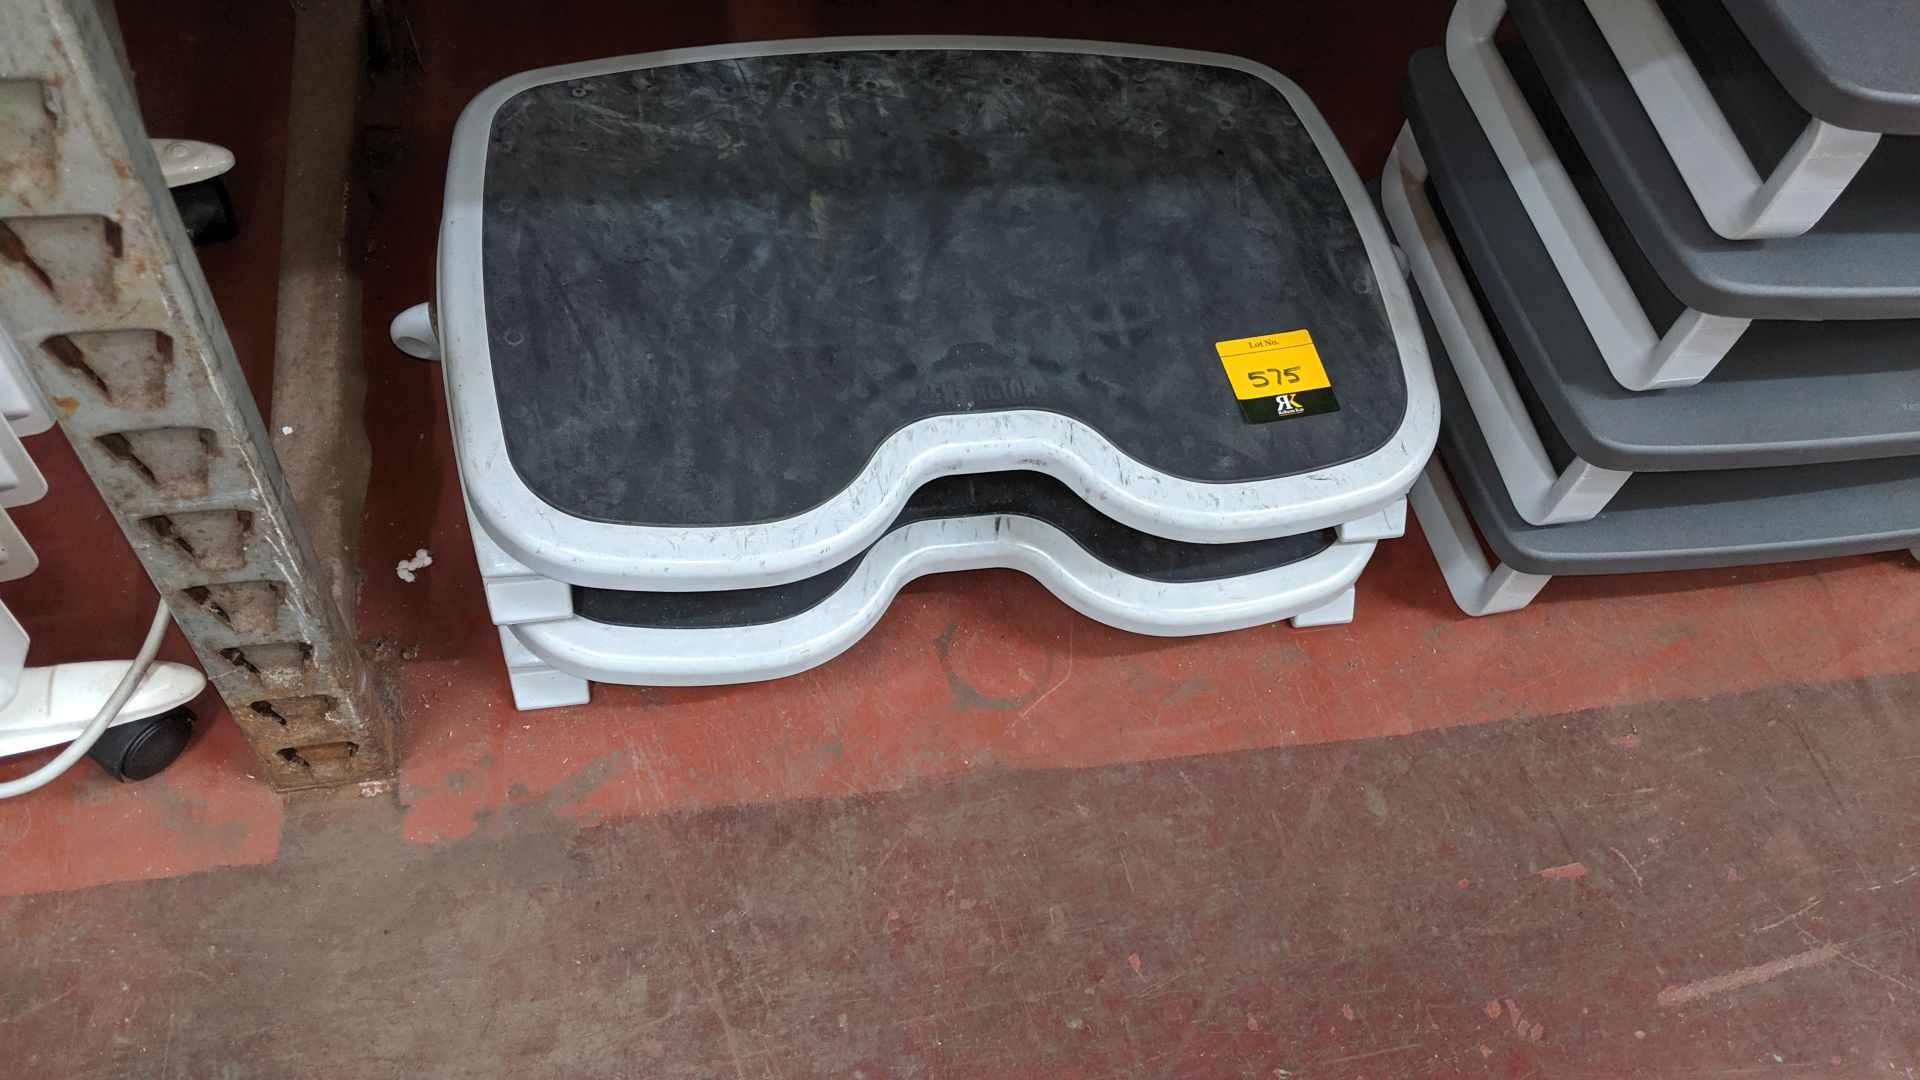 2 off office footrests . Lots 560 - 580 form the total assets of a healthcare recruitment company